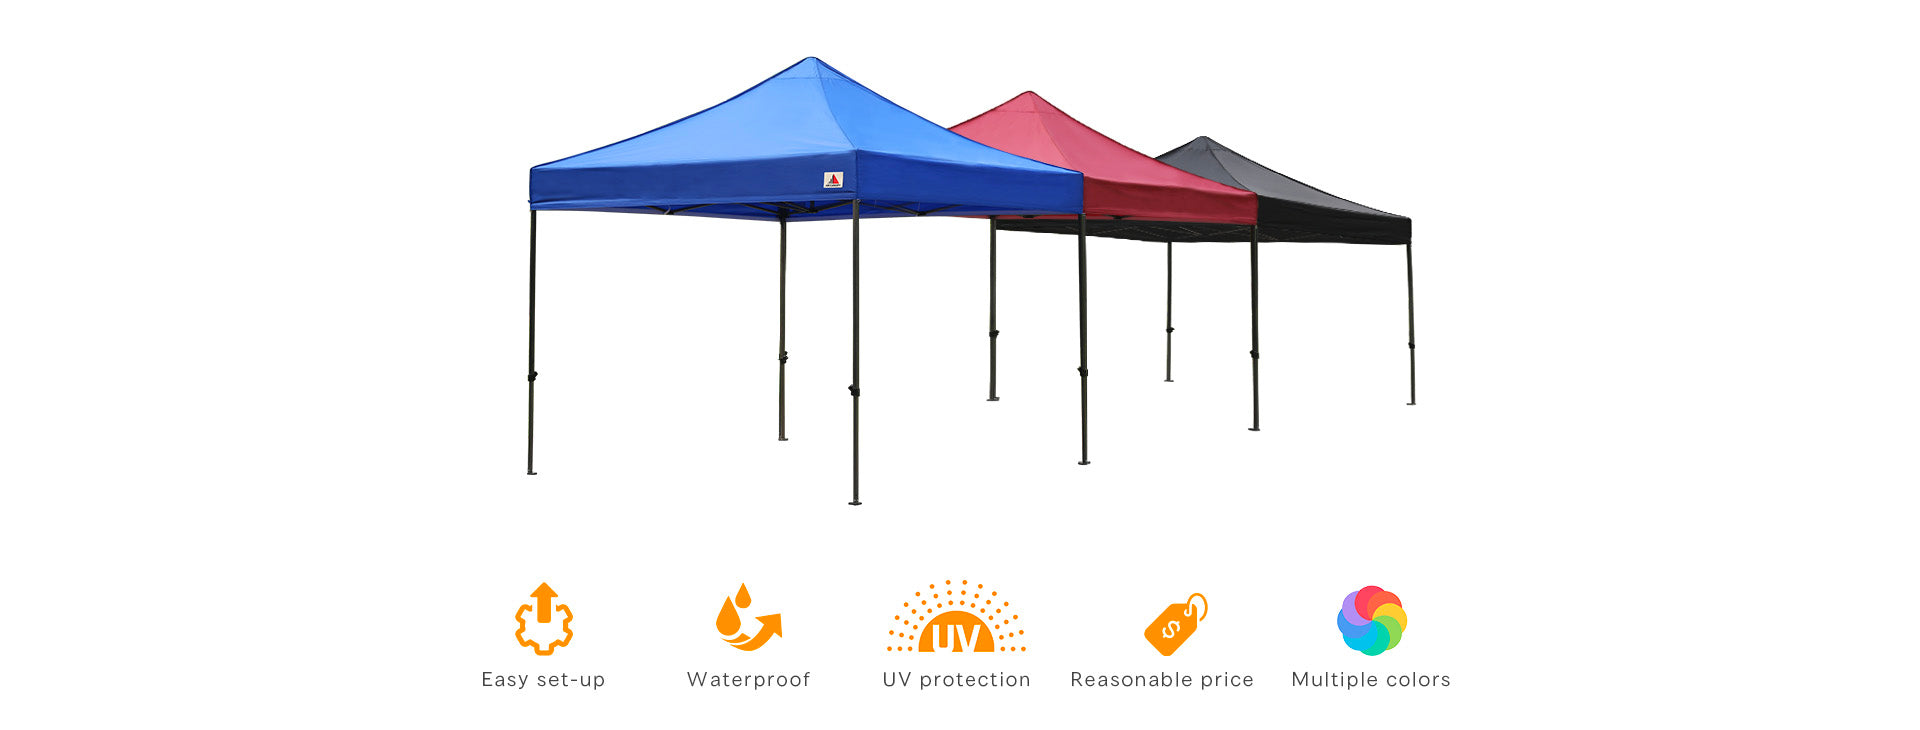 Pop Up Tents Custom Canopy Pop Up Canopy Canopy Tents Outdoor Canopies Abc Canopy